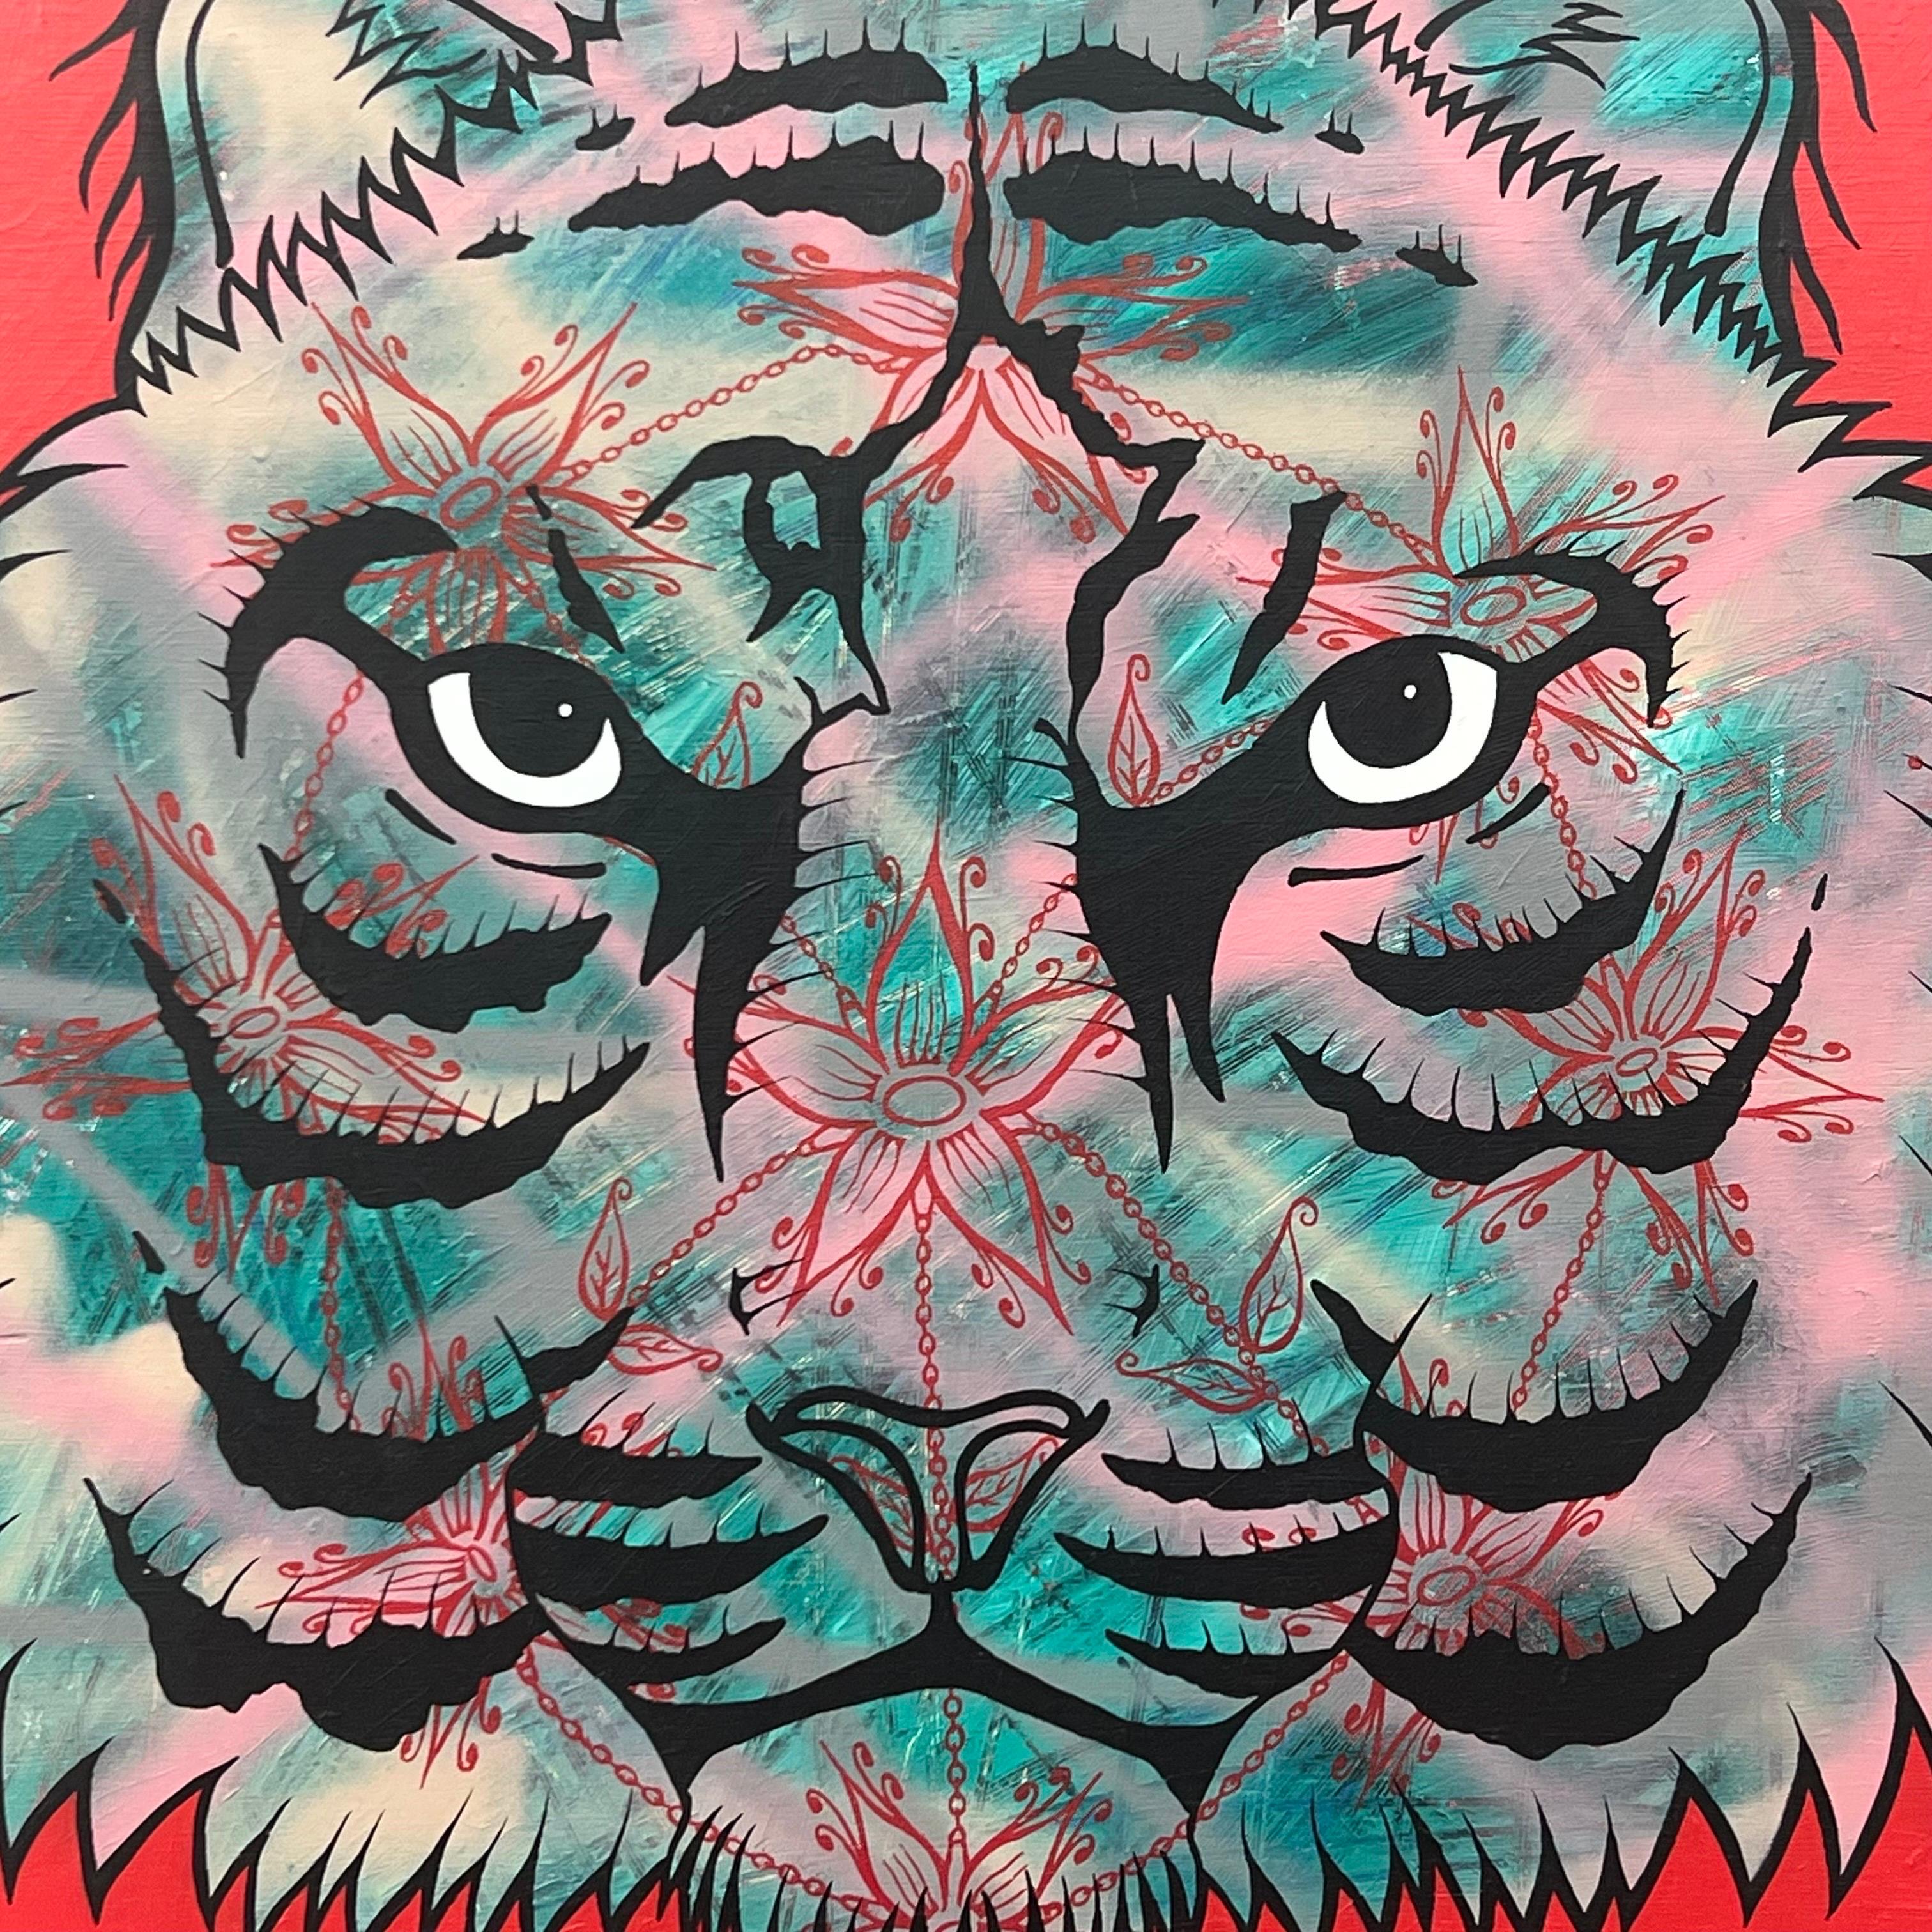 Tiger Portrait Pop Art with Floral Mandala in Chains by British Graffiti Artist - Painting by Chris Pegg